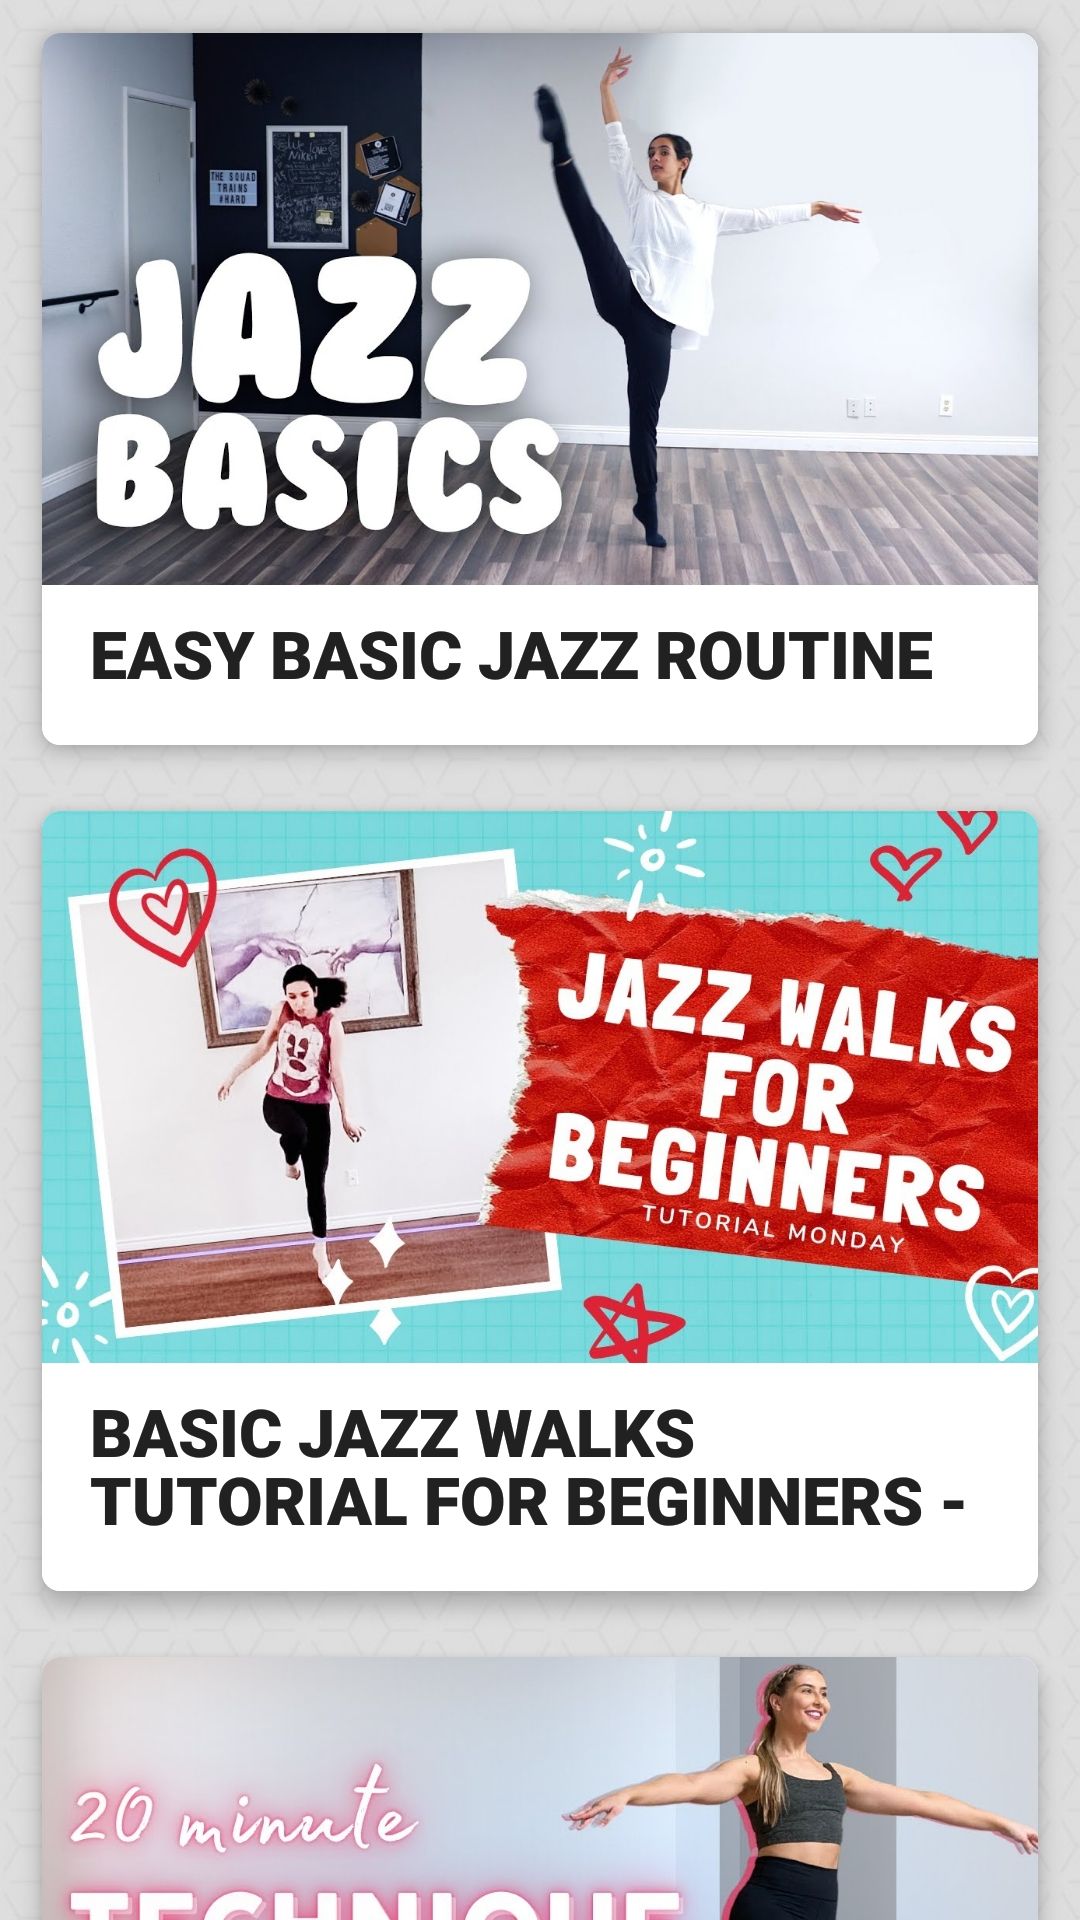 Learn dance at home mobile fitness app jazz